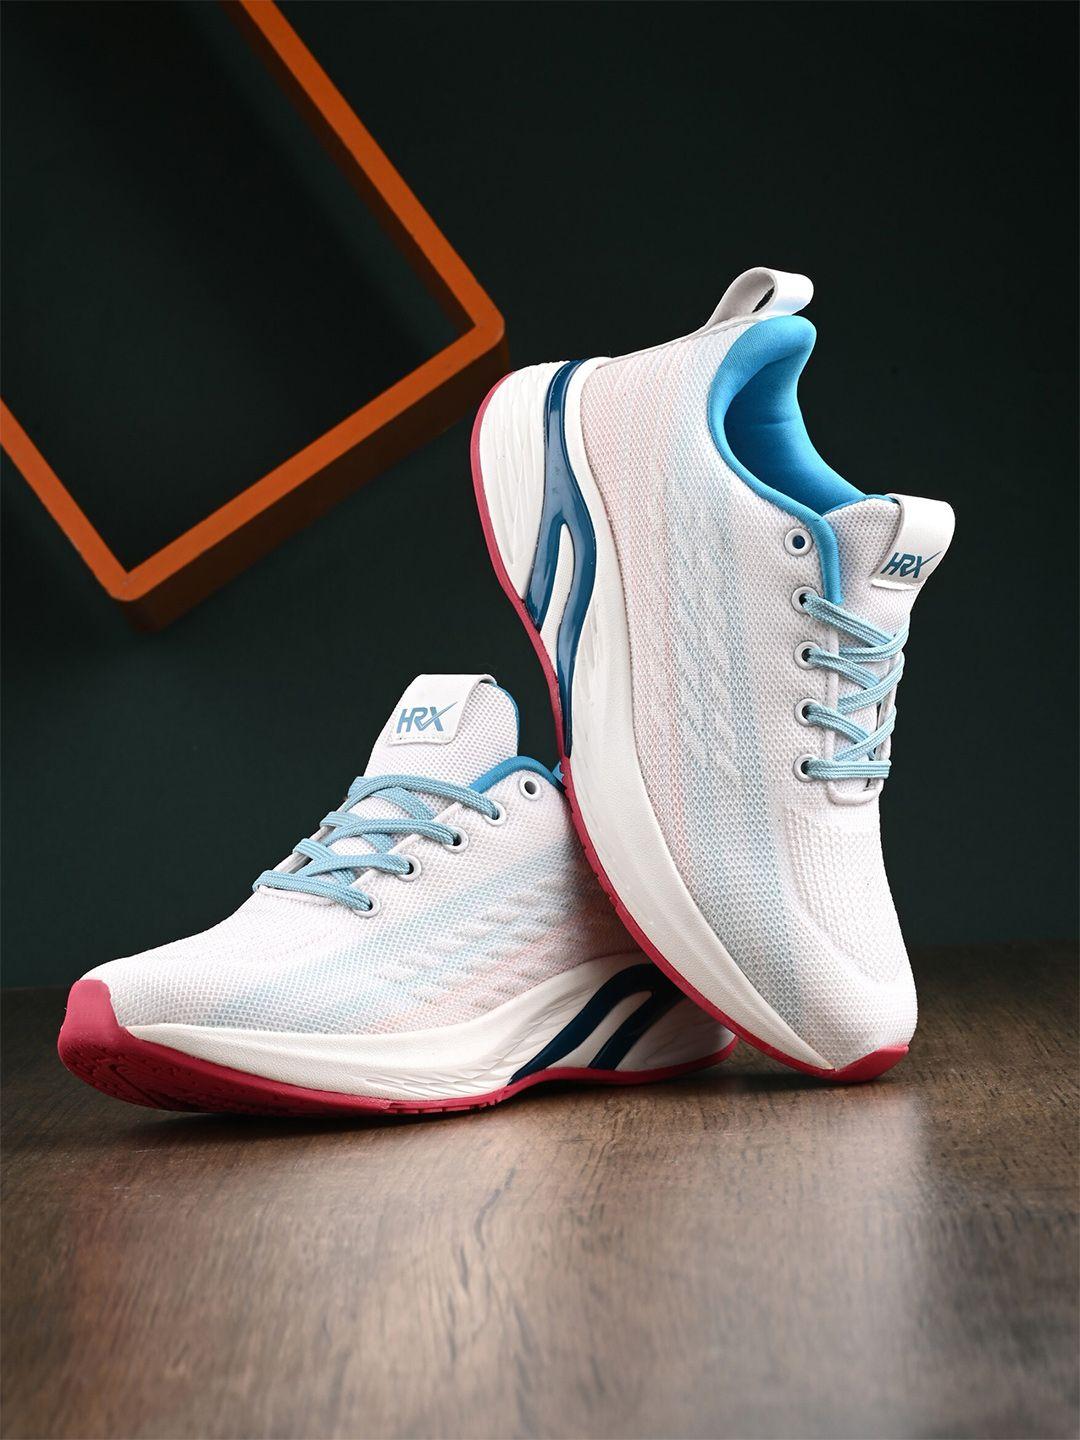 hrx-by-hrithik-roshan-women-off-white-lace-up-running-shoes